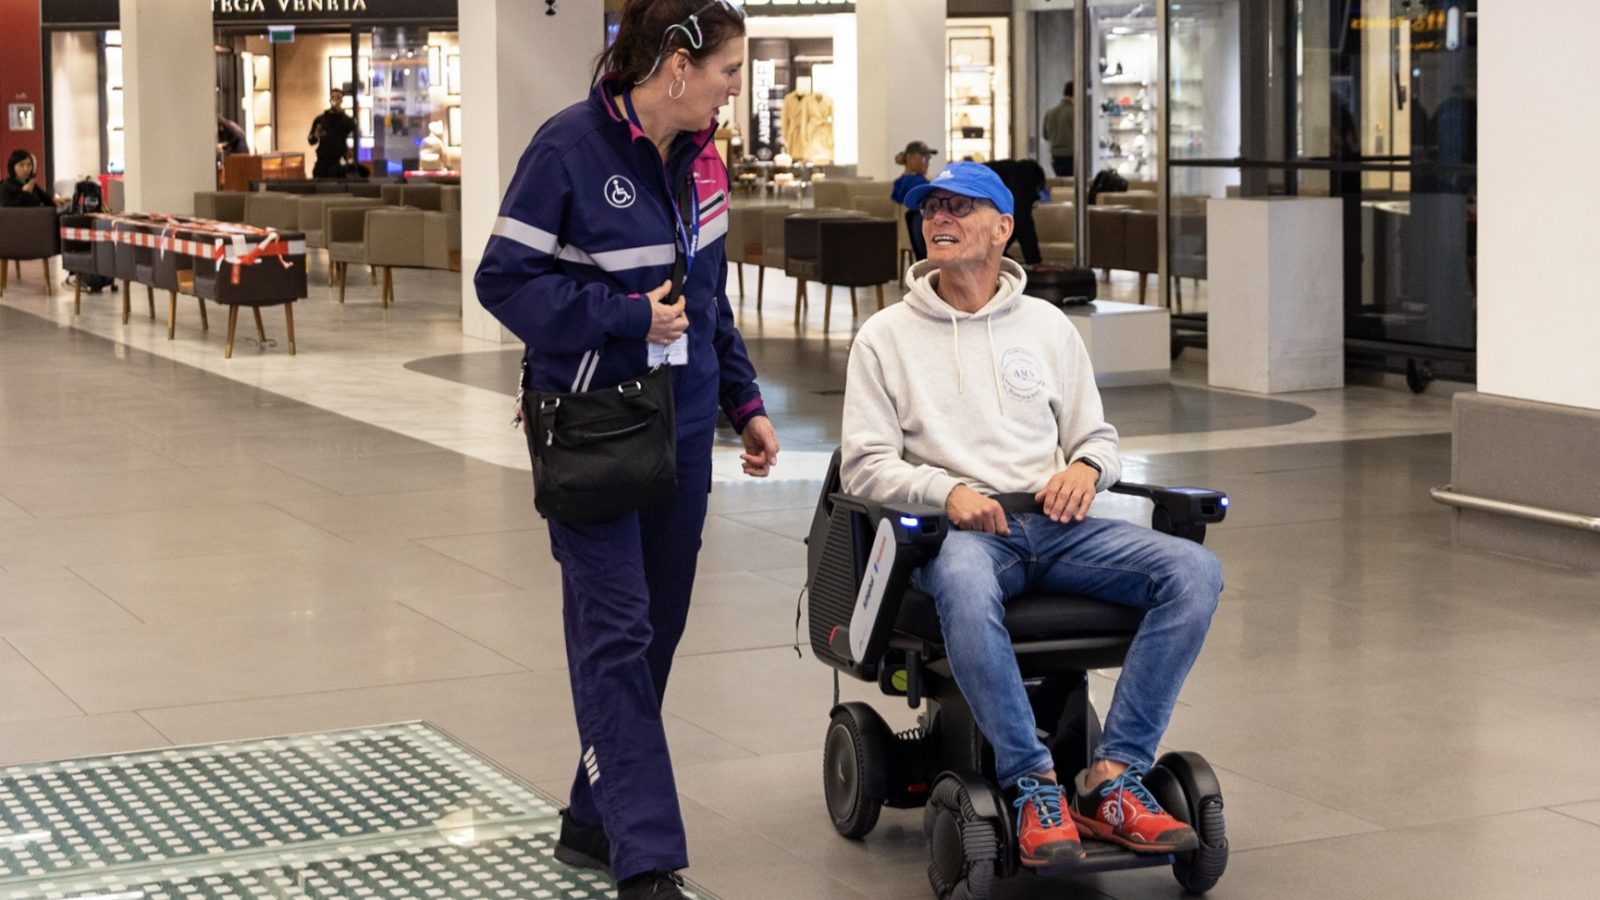 Man on power chair uses WHILL Autonomous Mobility Service to navigate airport.